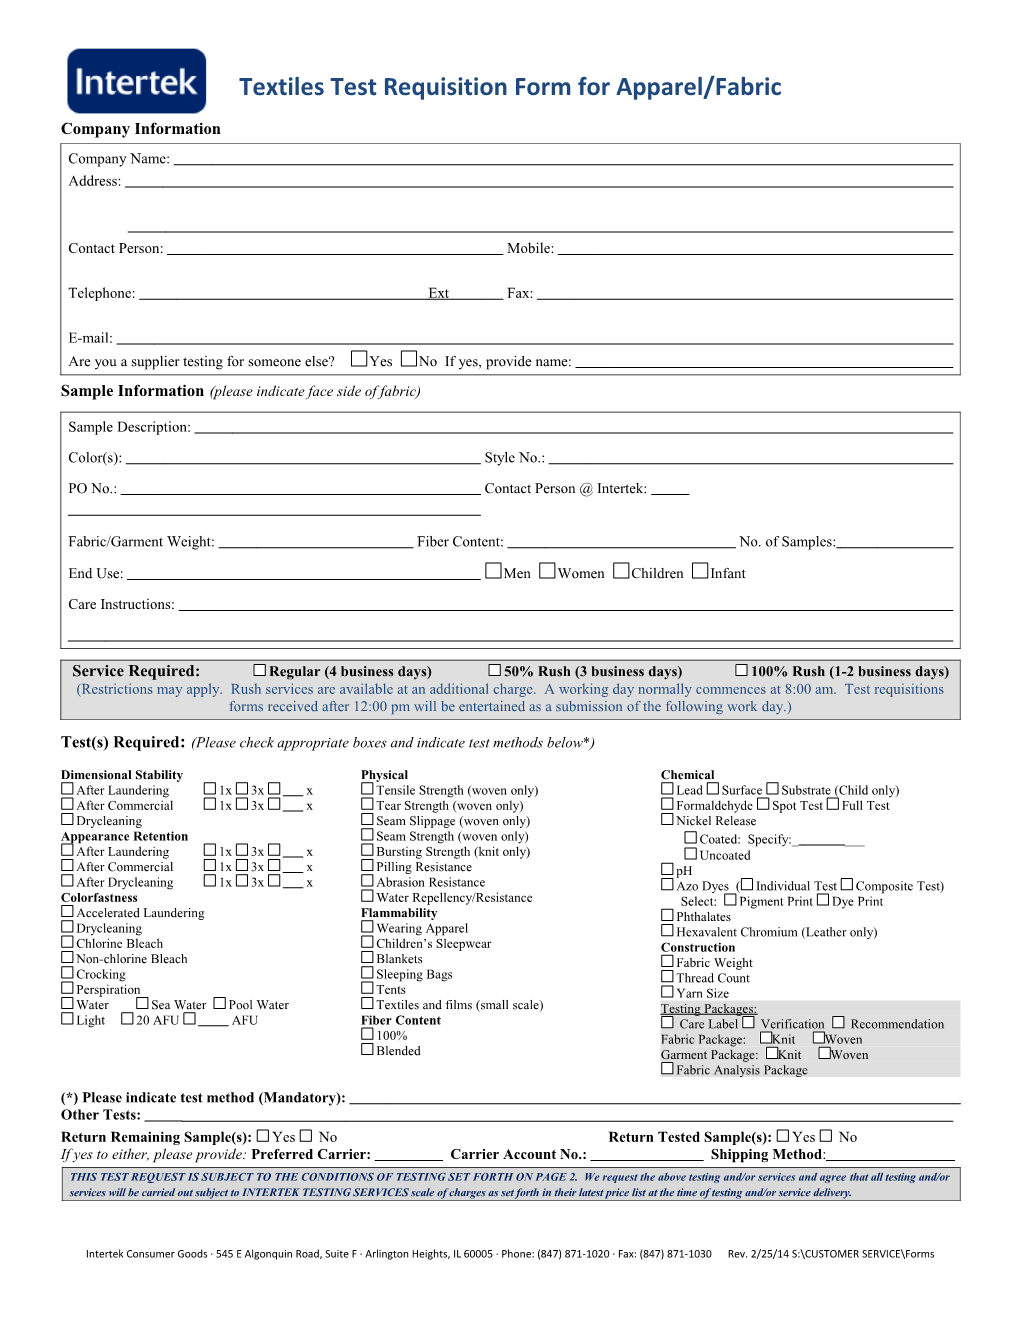 Textiles Test Requisition Form for Apparel/Fabric